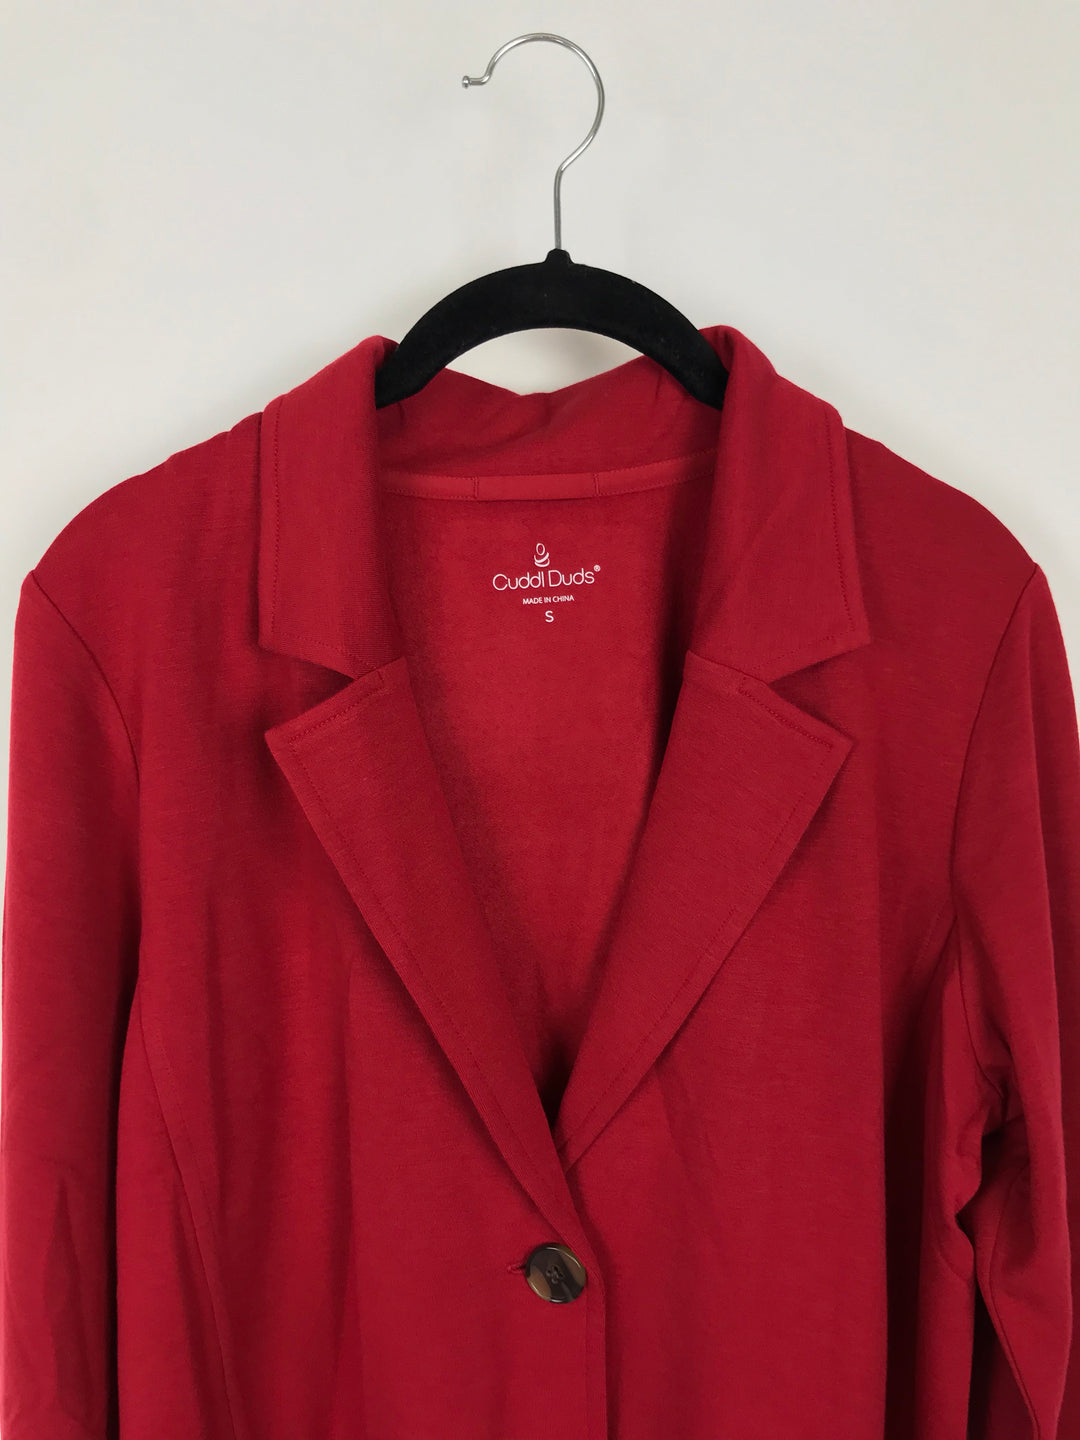 Red Cardigan - Size 2/4 and 6/8